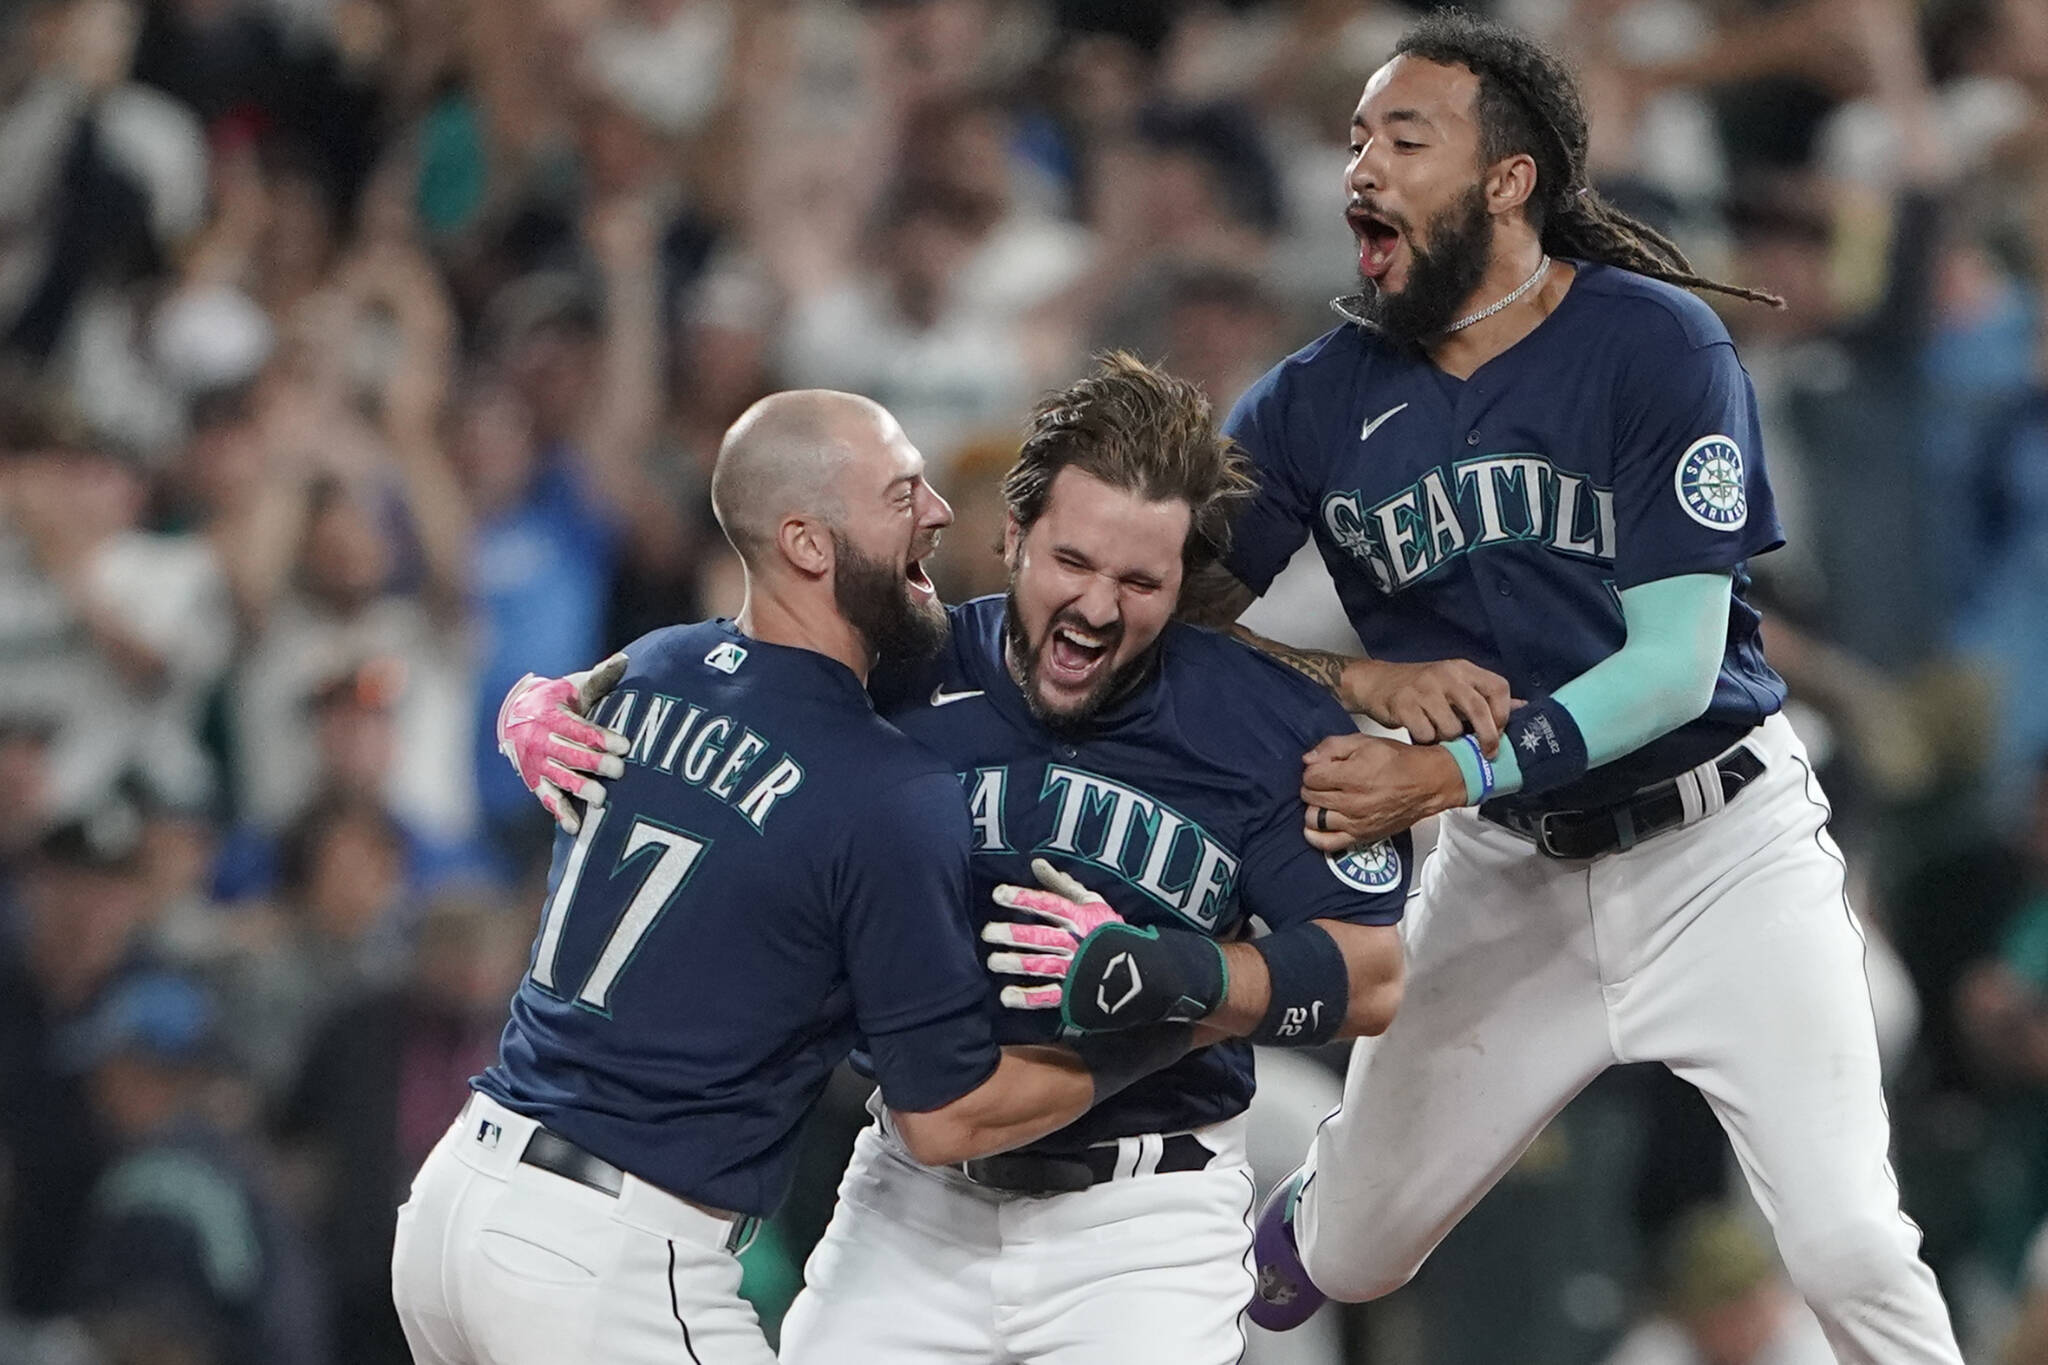 The Mariners’ Luis Torrens (center) is greeted by teammates Mitch Haniger (left) and J.P. Crawford after Torrens hit a walk-off RBI single in the 13th inning to give the Mariners a 1-0 win over the Yankees on Tuesday in Seattle. (AP Photo/Ted S. Warren)